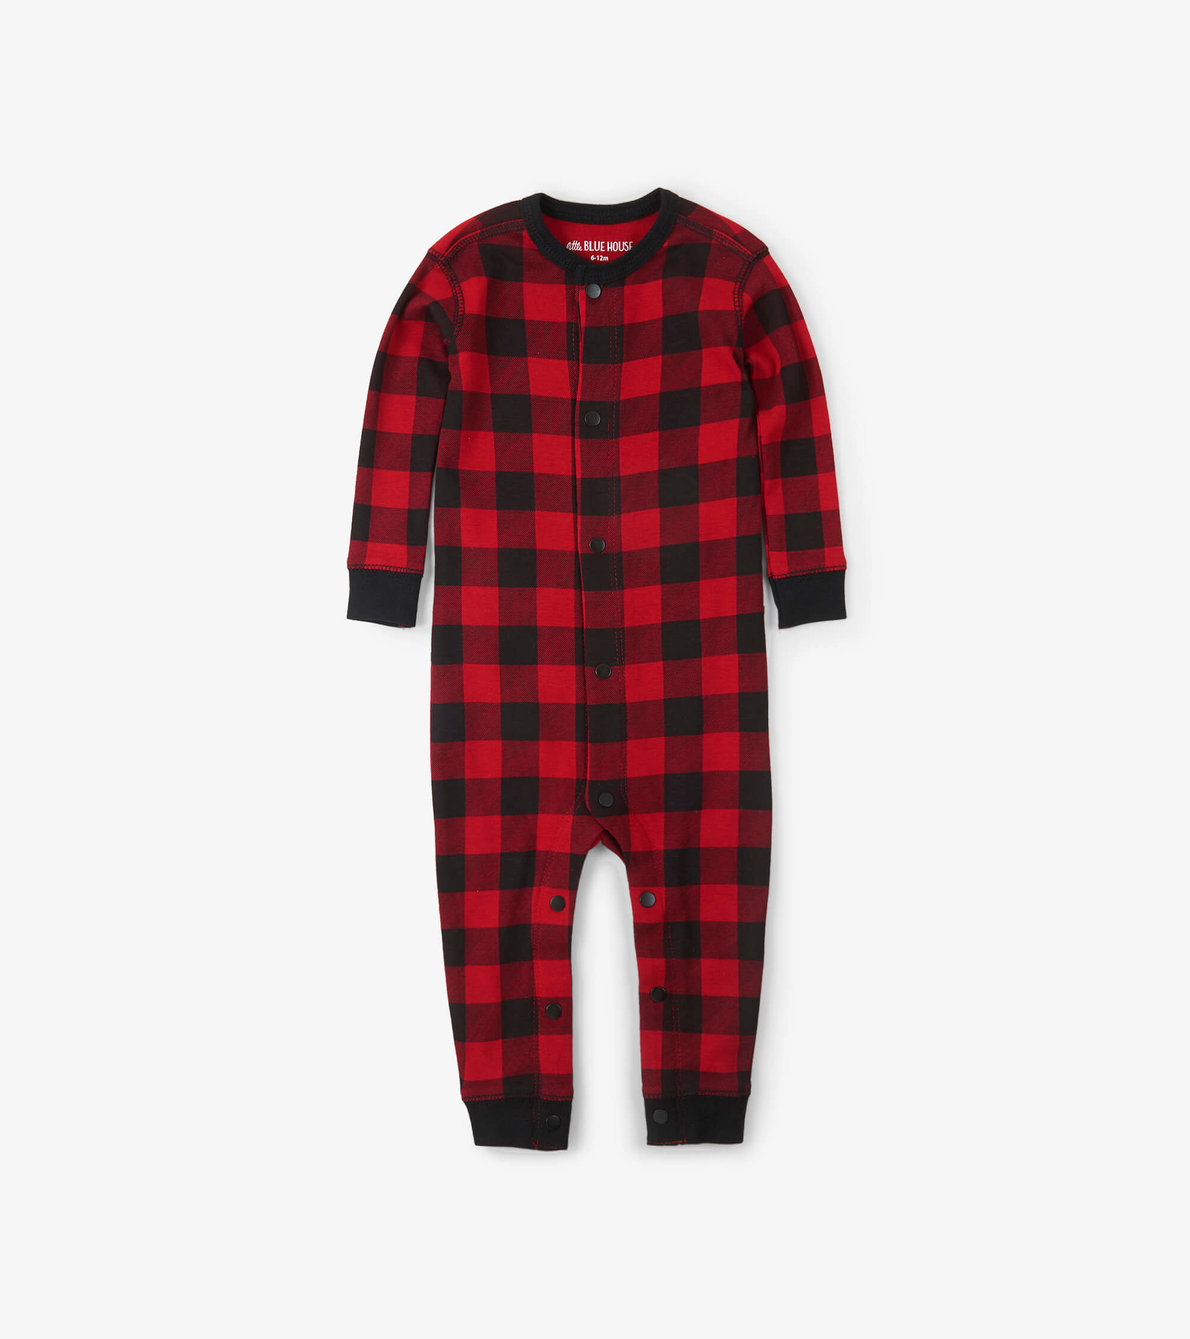 View larger image of "Trailing Behind" Buffalo Plaid Baby Union Suit